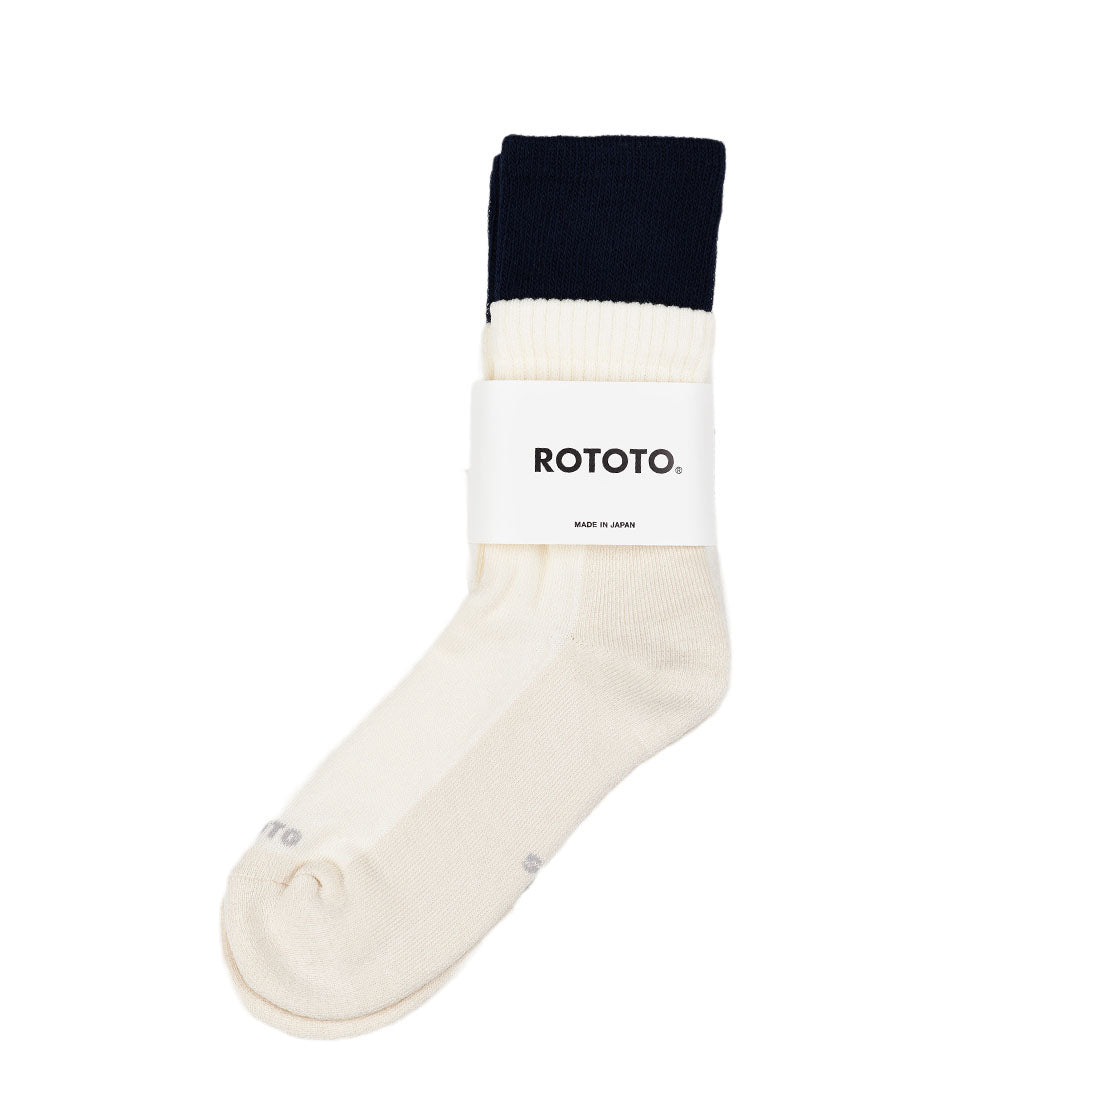 Rototo Top Block Navy / Off White | The Sporting Lodge